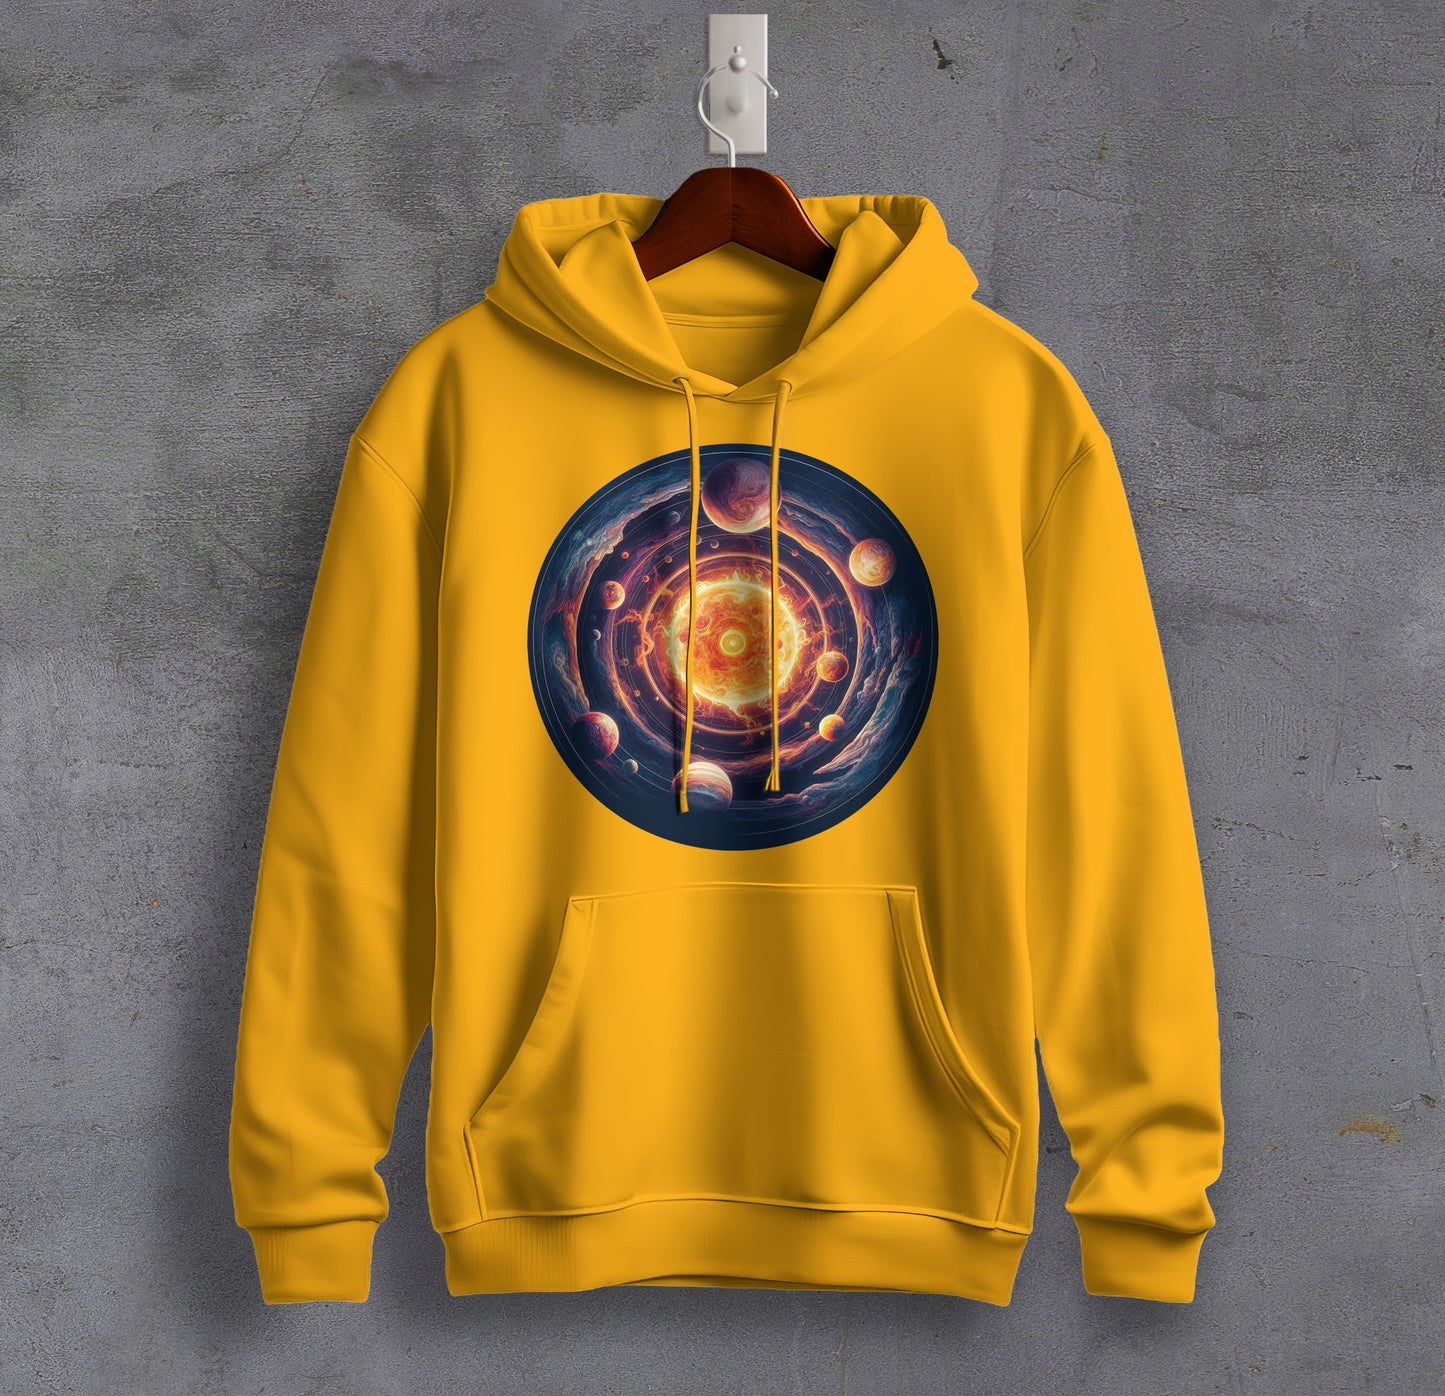 Cosmic Odyssey - Graphic Printed Hooded Sweat Shirt for Men - Cotton - Cosmos Sweat Shirt 🪐 ☀️ ☯️ 🌘🌑🌒